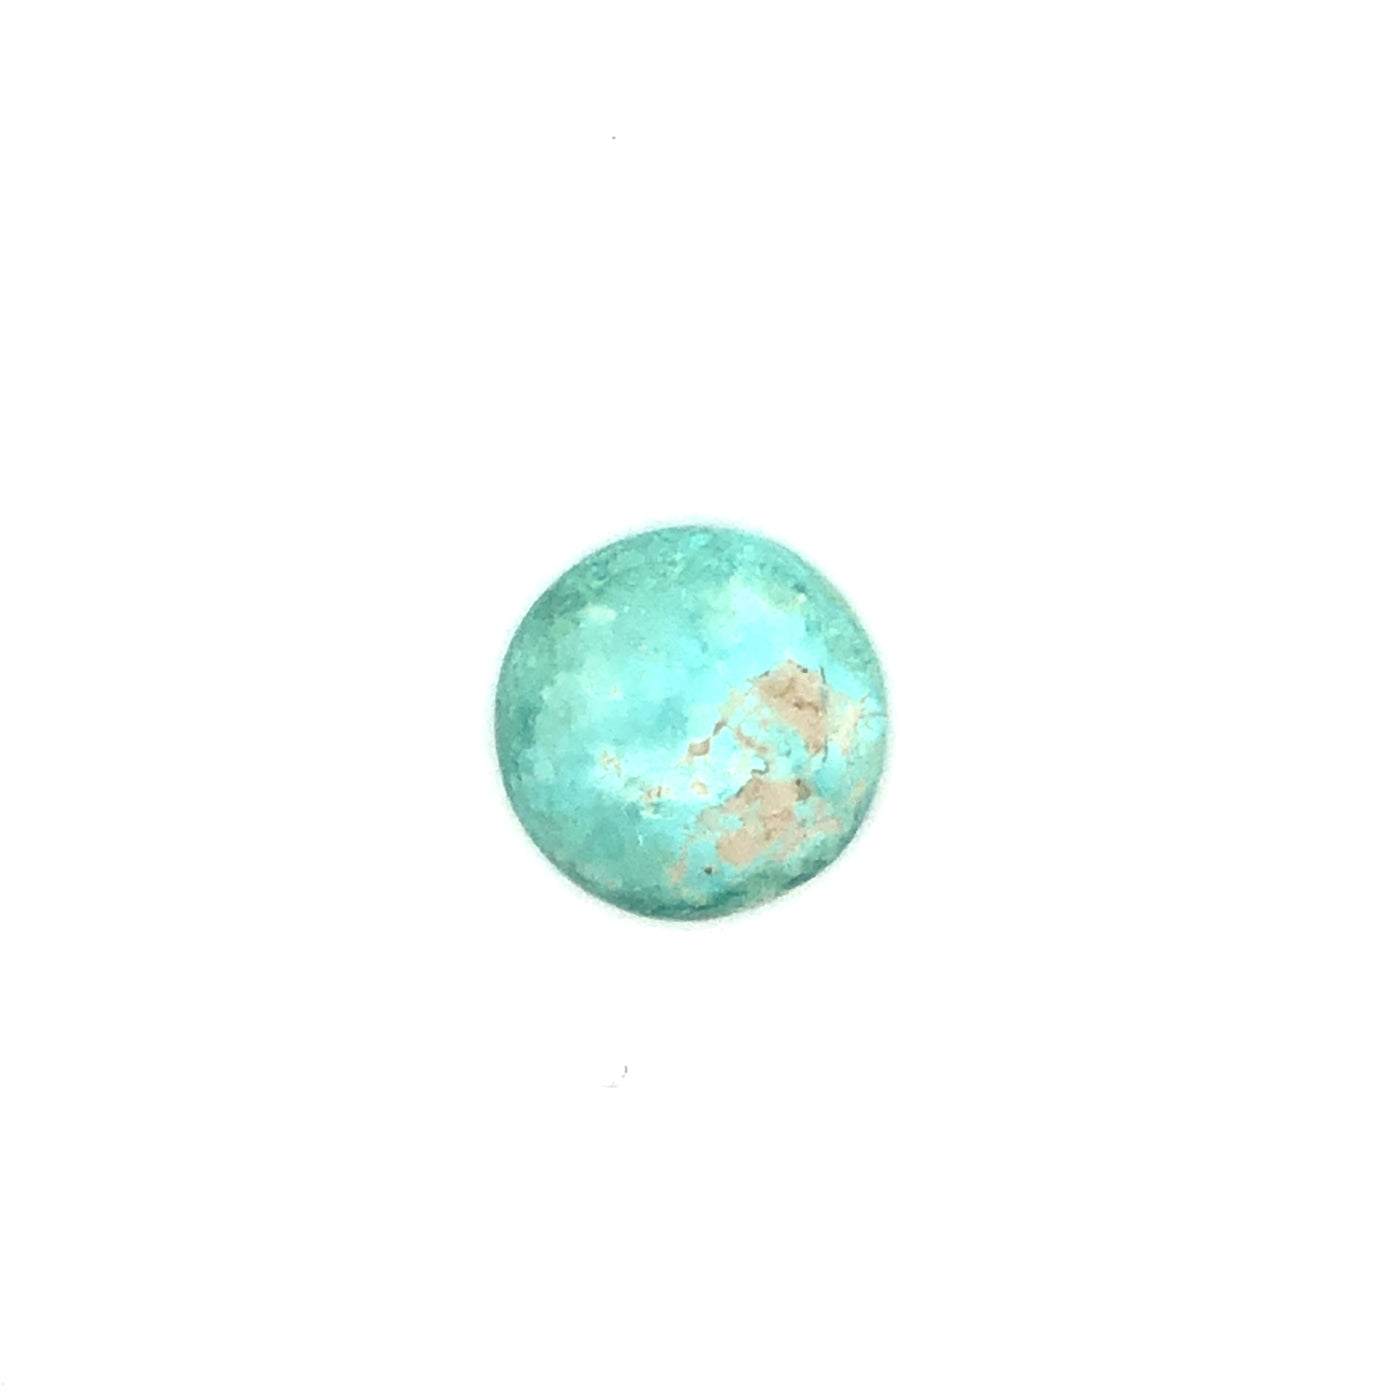 Loose Narooma Turquoise Round Shaped 11.17Ct Blue With Some White